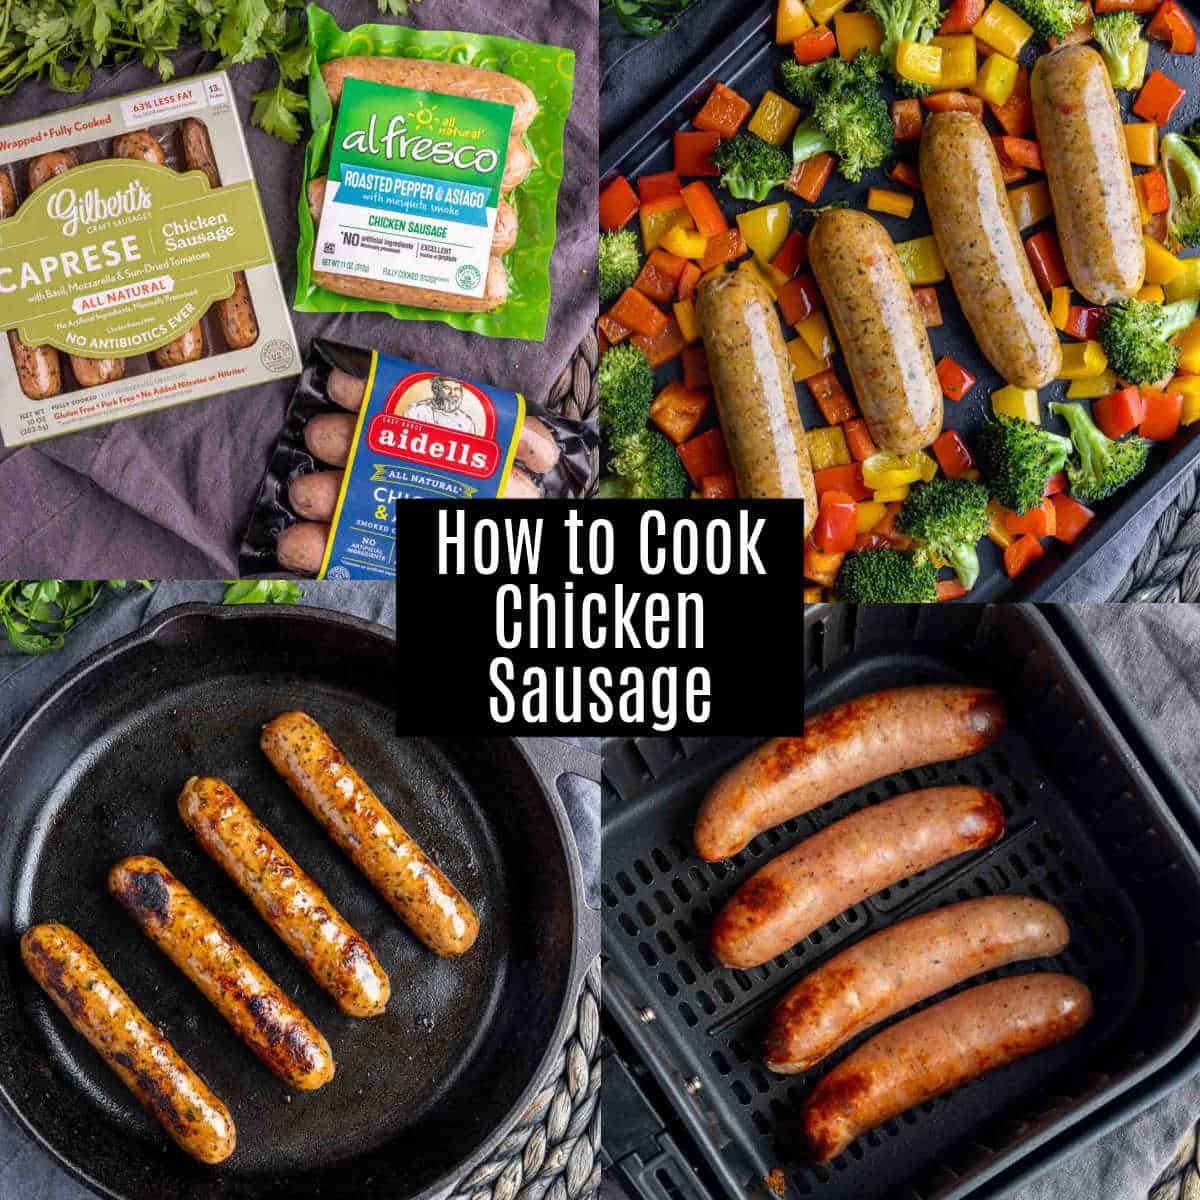 How to Cook Chicken Sausage and ingredients